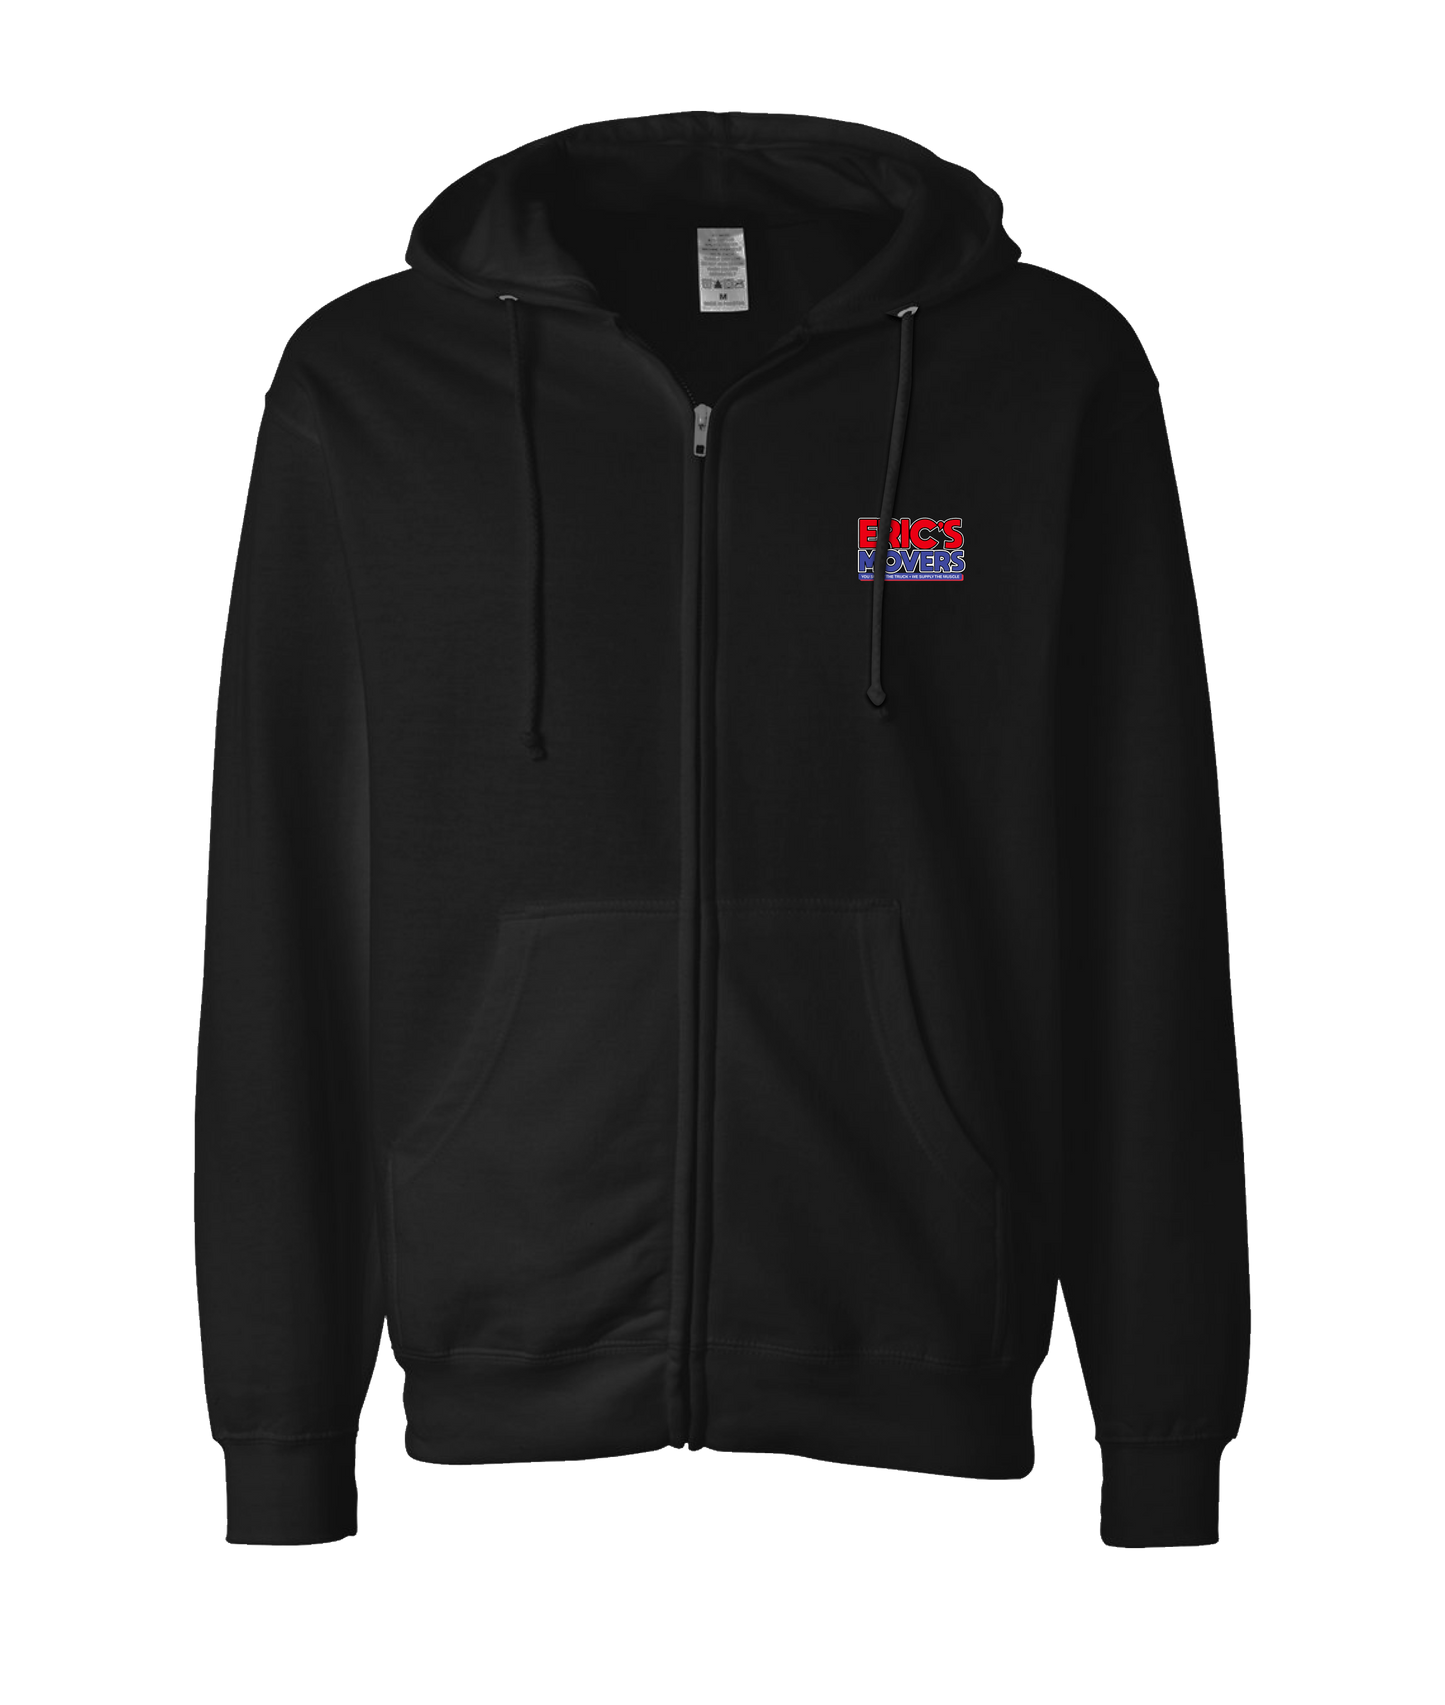 Eric's Movers - $75 an Hour  - Black Zip Up Hoodie